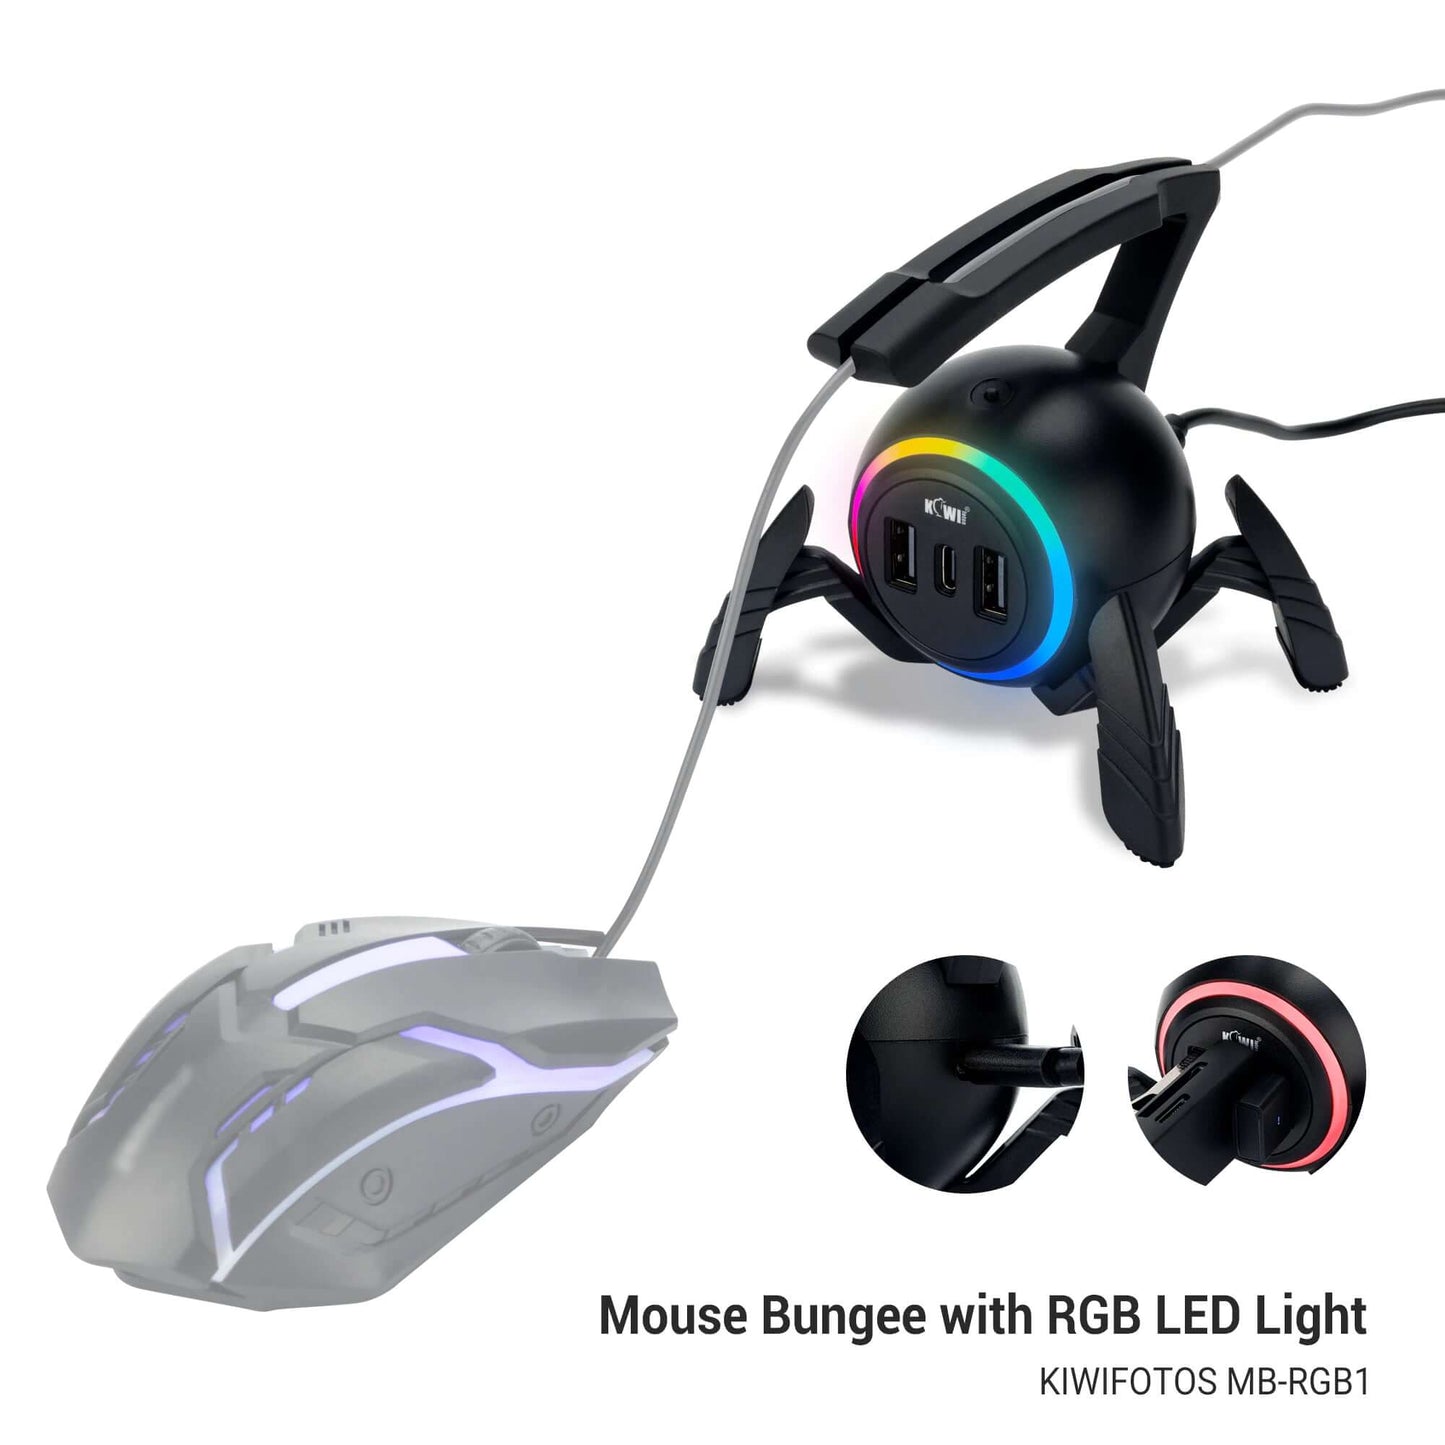 Esports Spider Gaming Mouse Bungee With 2 USB 2.0 port & 1 Type-C port - EGGBOX TECH